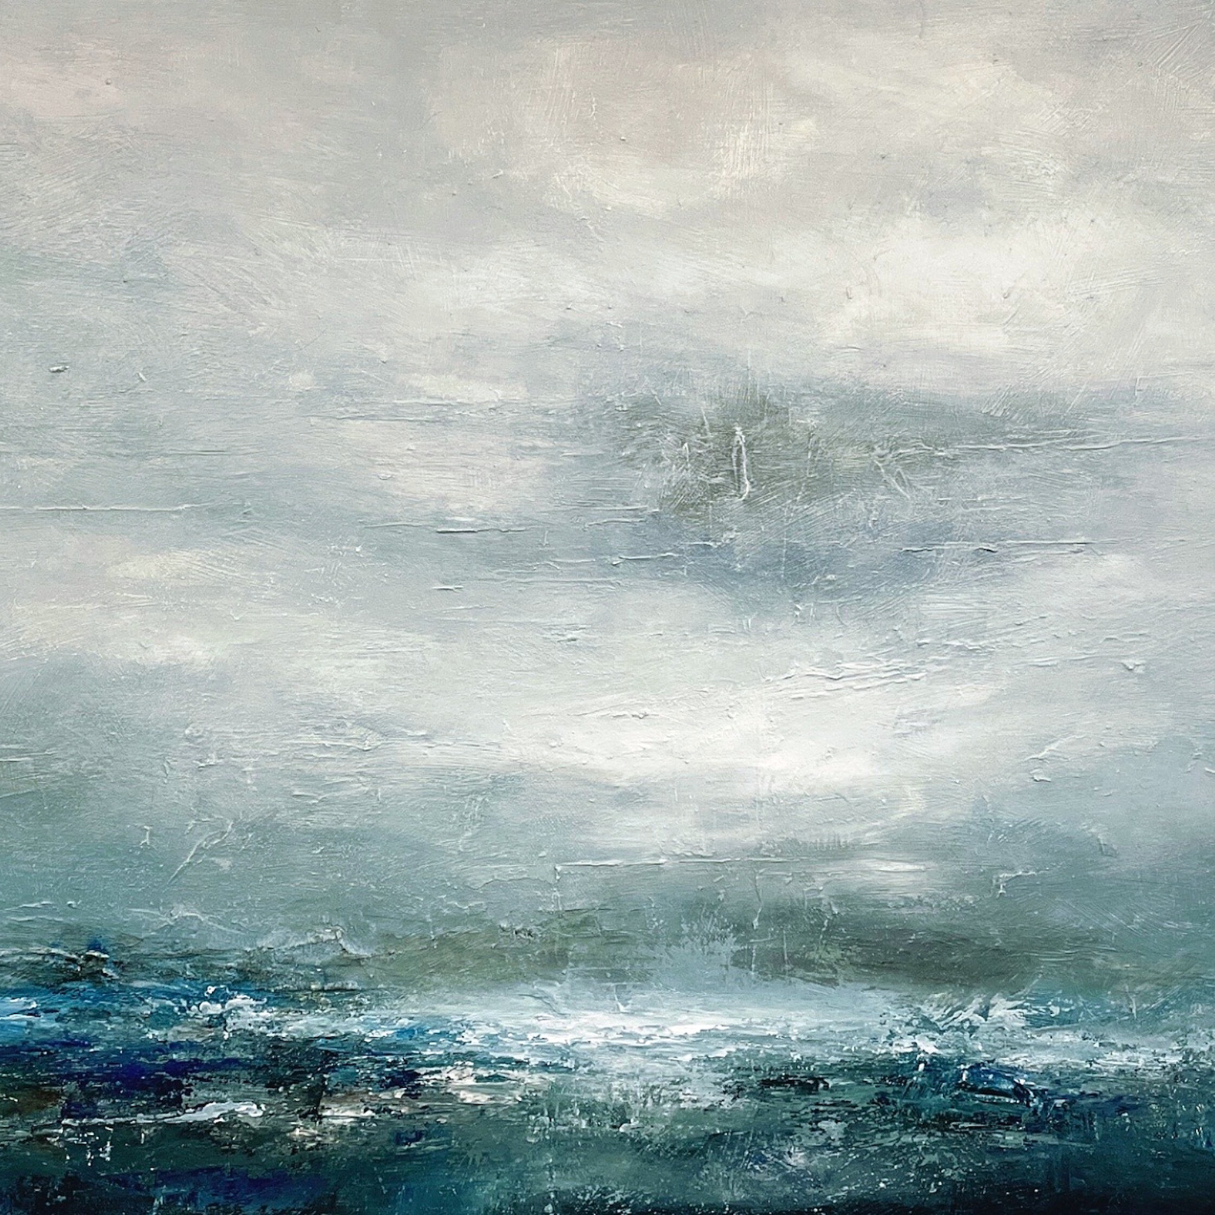 The Sidespace Gallery at Salamanca Arts Centre is proud to present Winter Wild, a new exhibition of abstract seascape paintings by fine artist Hannah Blackmore. Running from June 14th to June 27th, the exhibition showcases textured paintings that capture the moods of the Tasmanian coastline.
 
